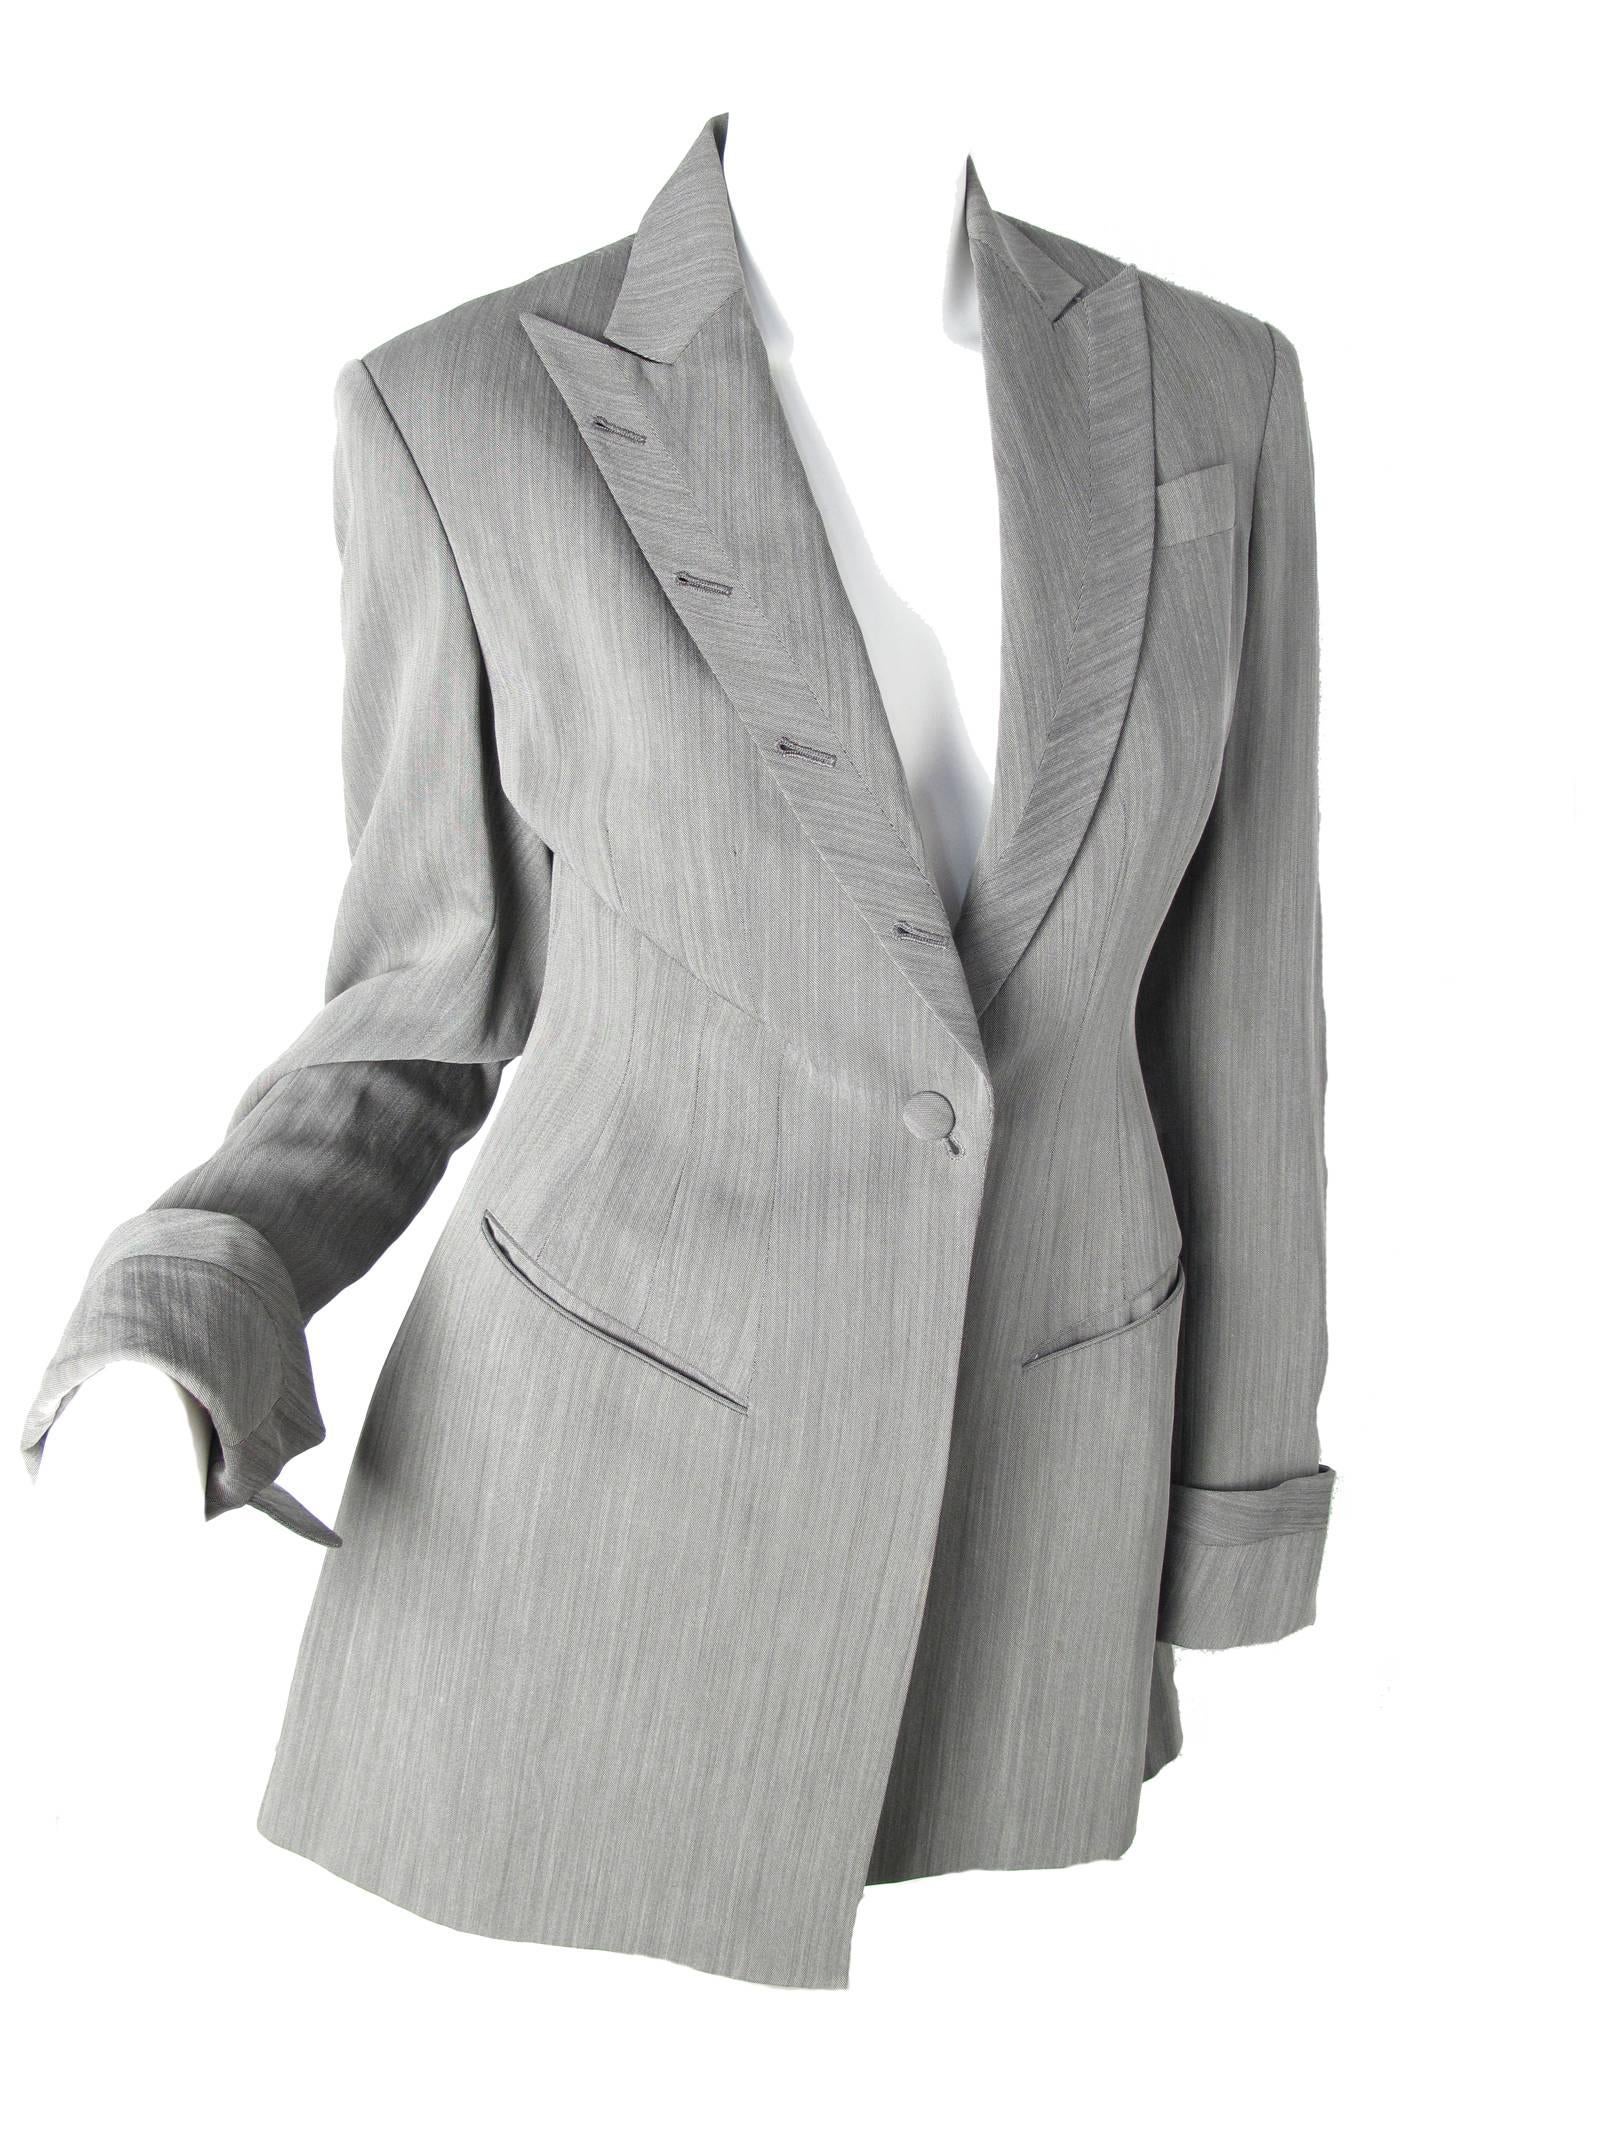 Gray 1990s Richard Tyler Suit with Button Holes up Collar  